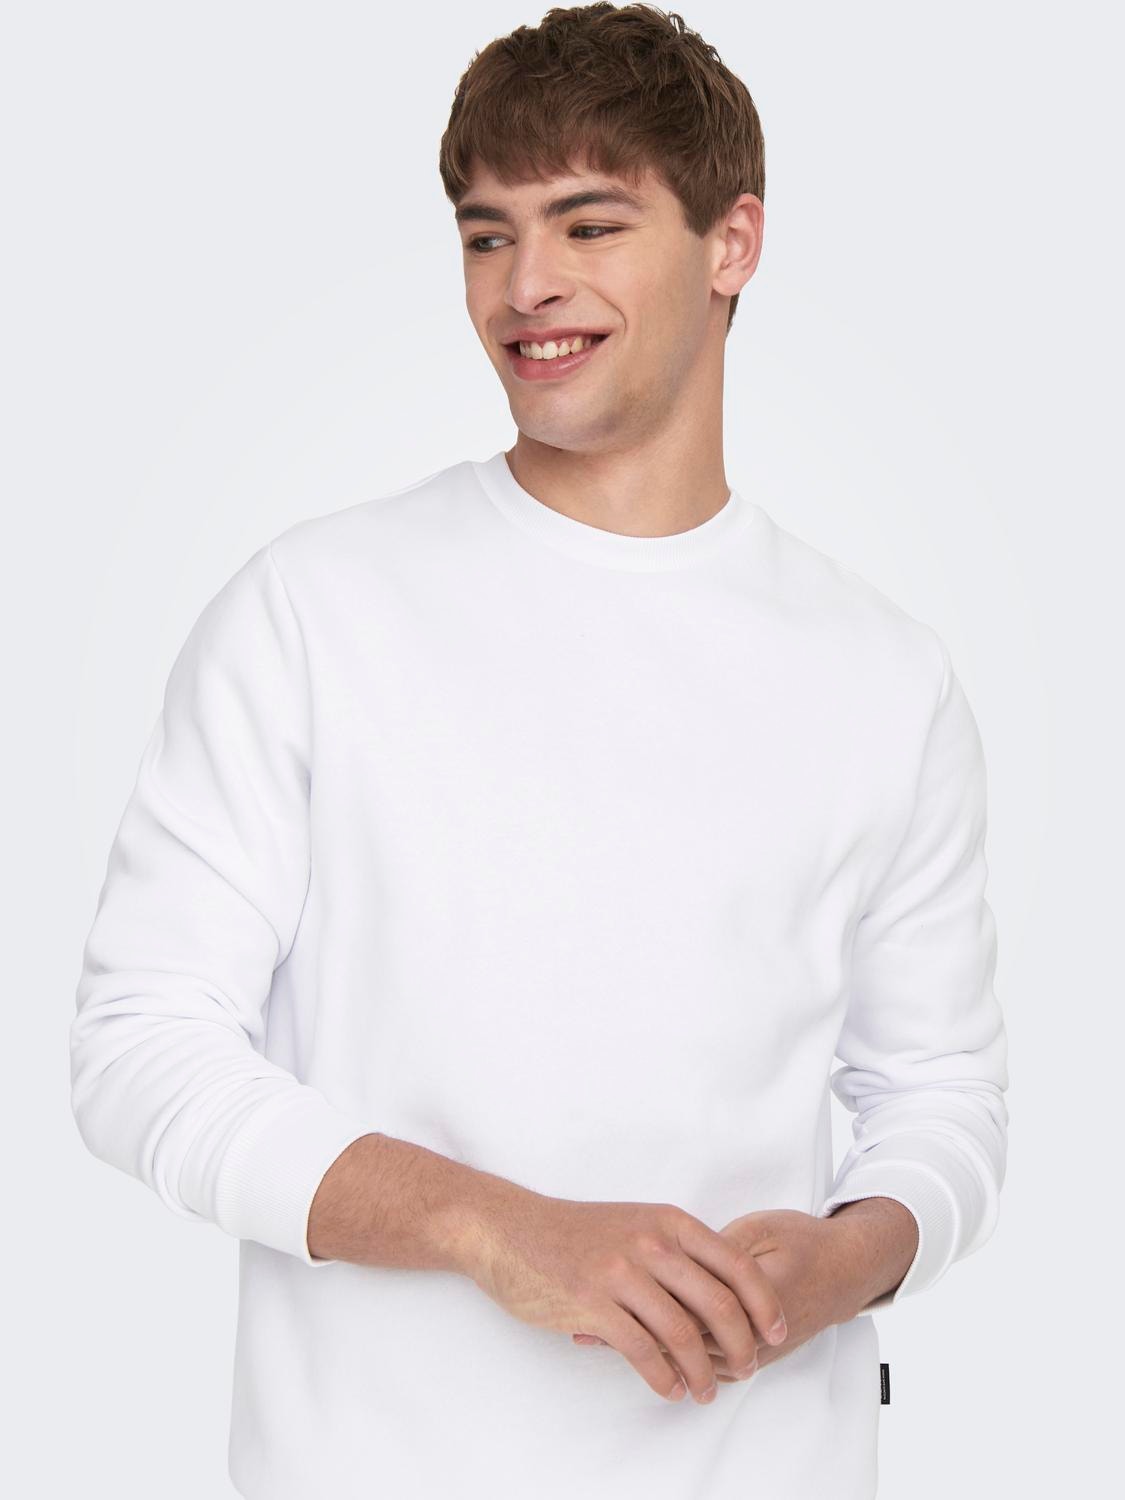 ONLY & SONS O-hals sweatshirt -Bright White - 22018683